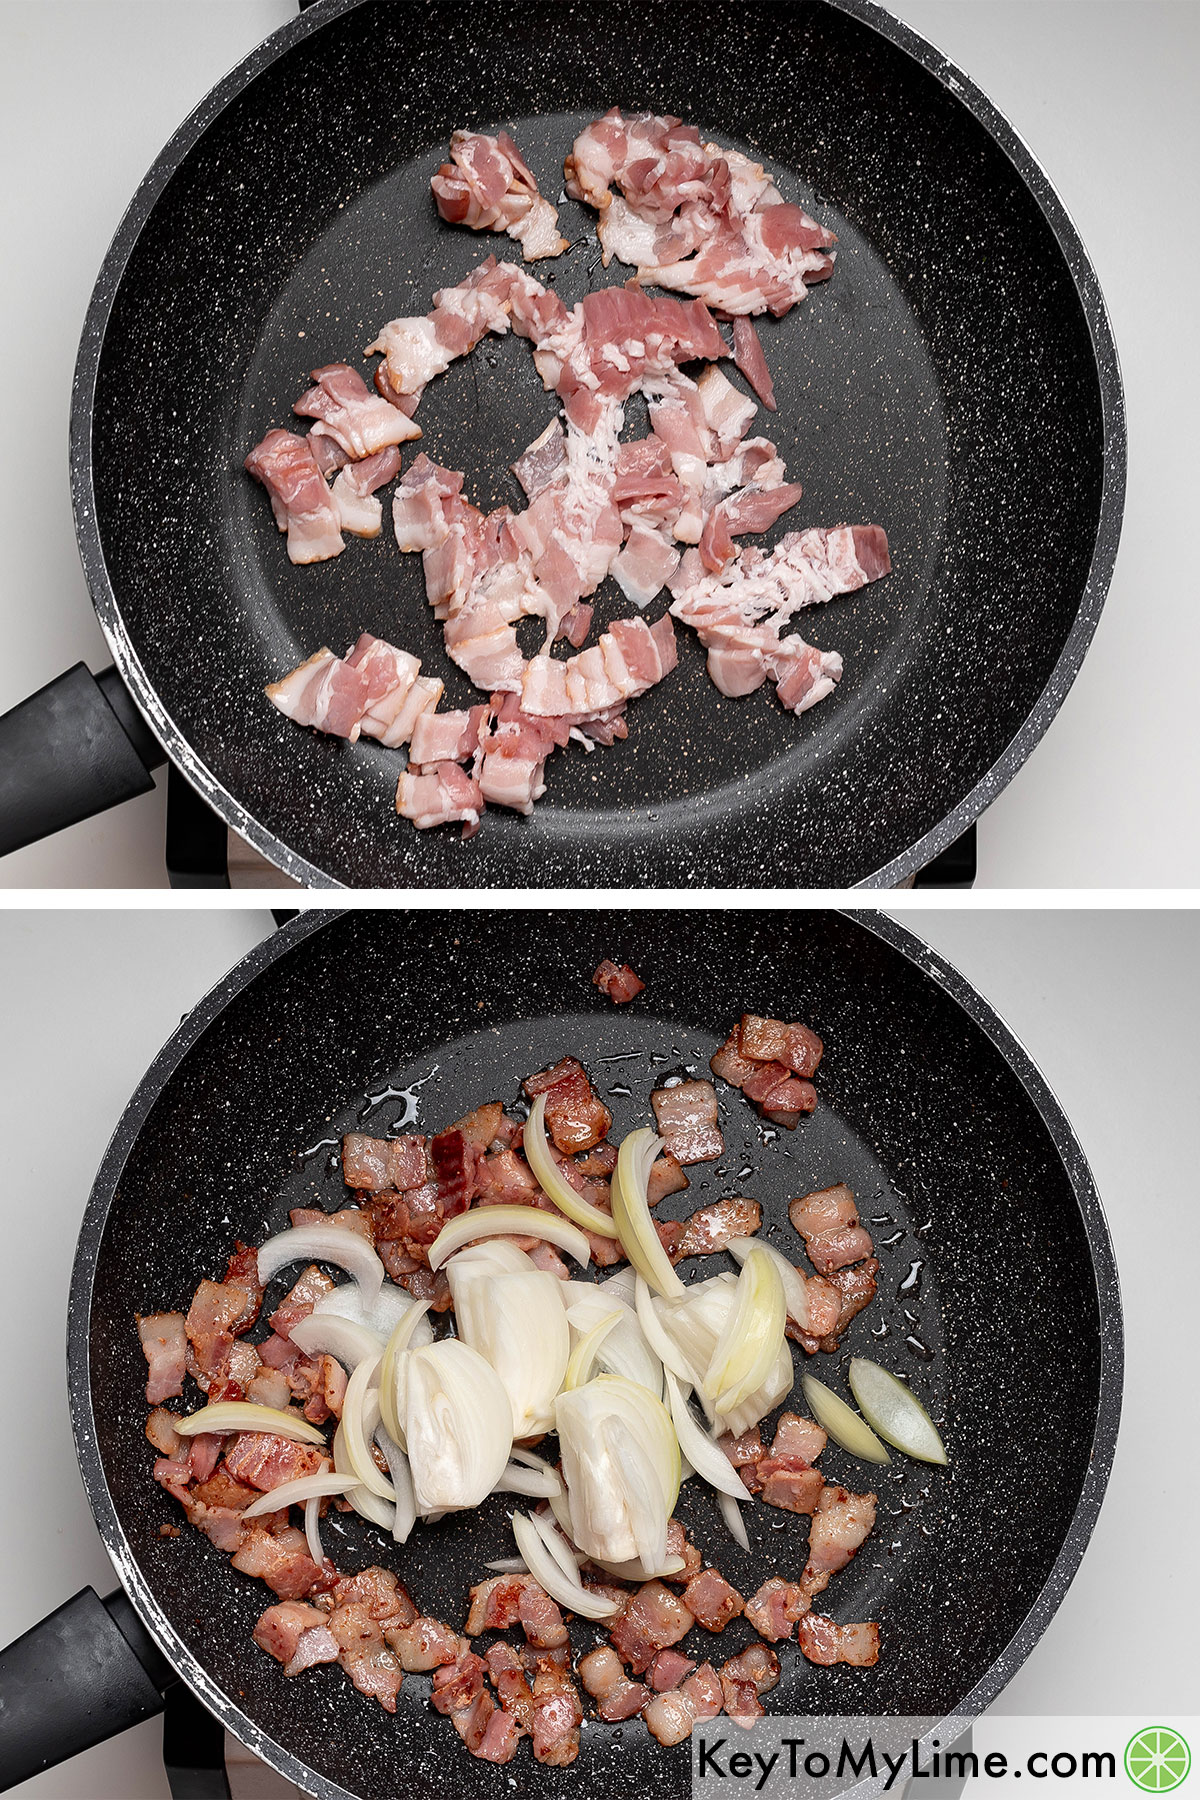 Cooking bacon in a hot skillet half way, and then adding onions and sauteing until translucent.